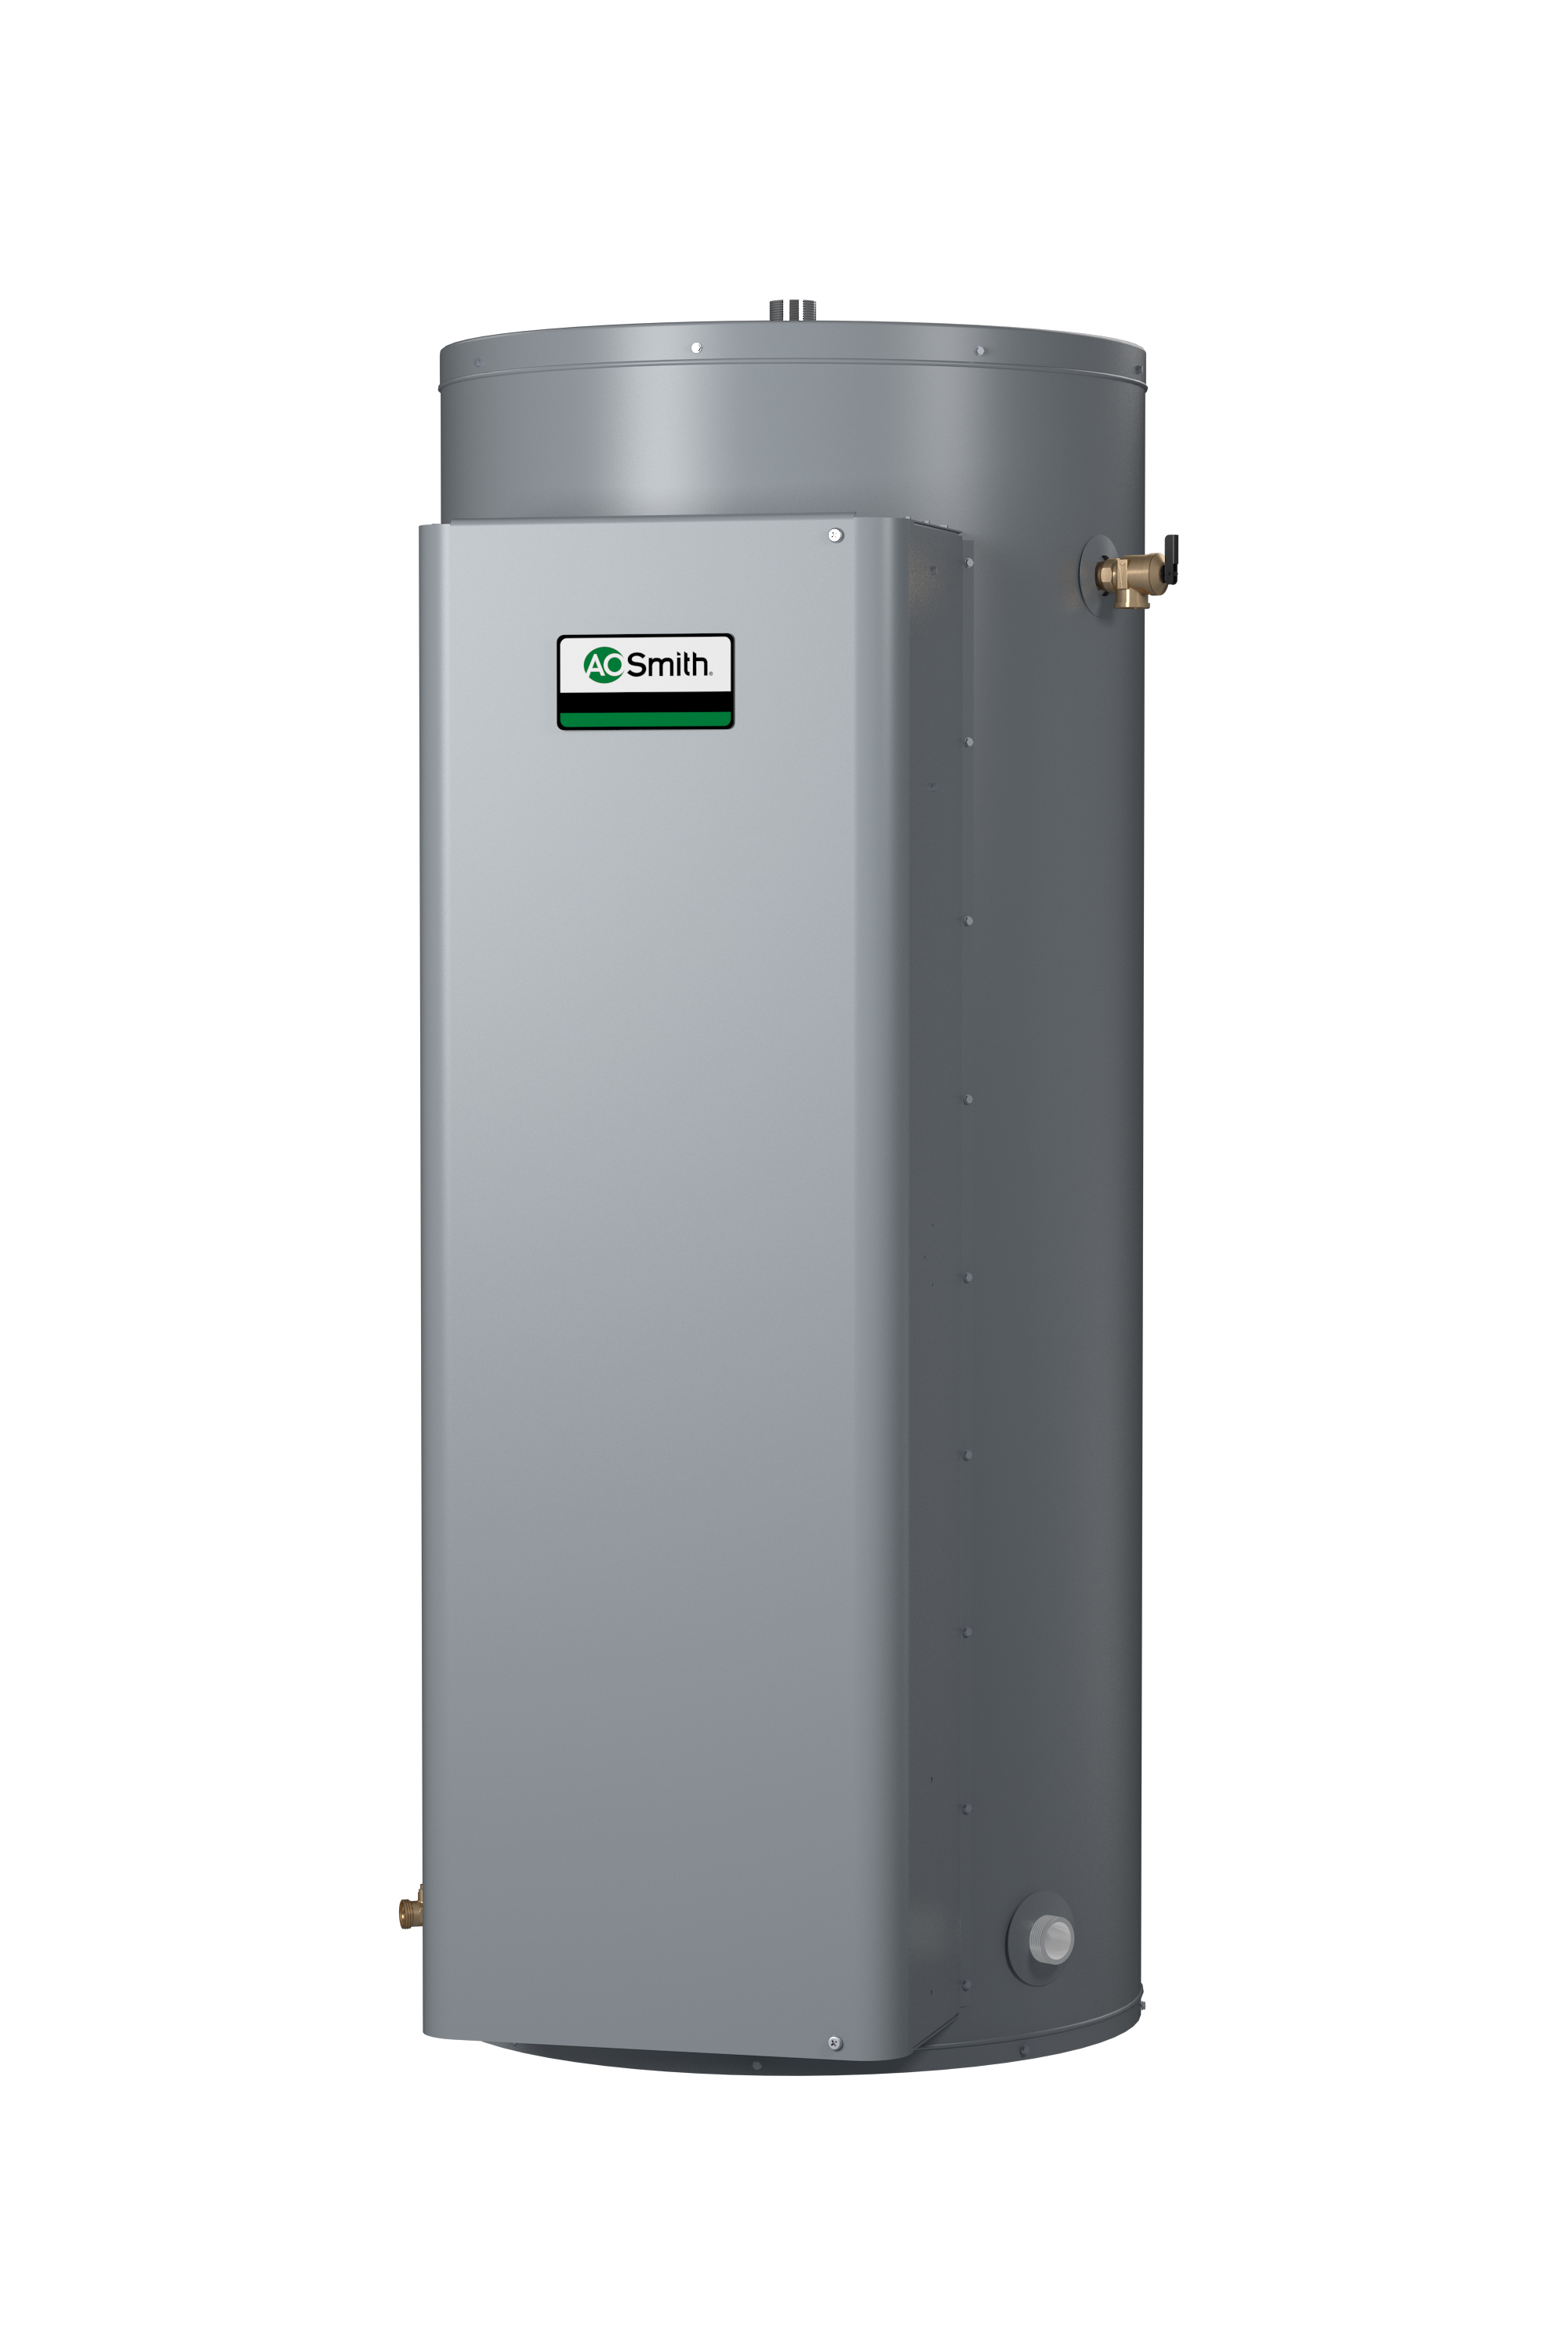 AO SMITH DVE-120-12, 119 GALLONS, 12.3KW, 208 VOLT, 33.3 AMPS, 3 PHASE, 3 ELEMENT, GOLD Xi SERIES HEAVY DUTY COMMERCIAL ELECTRIC WATER HEATER